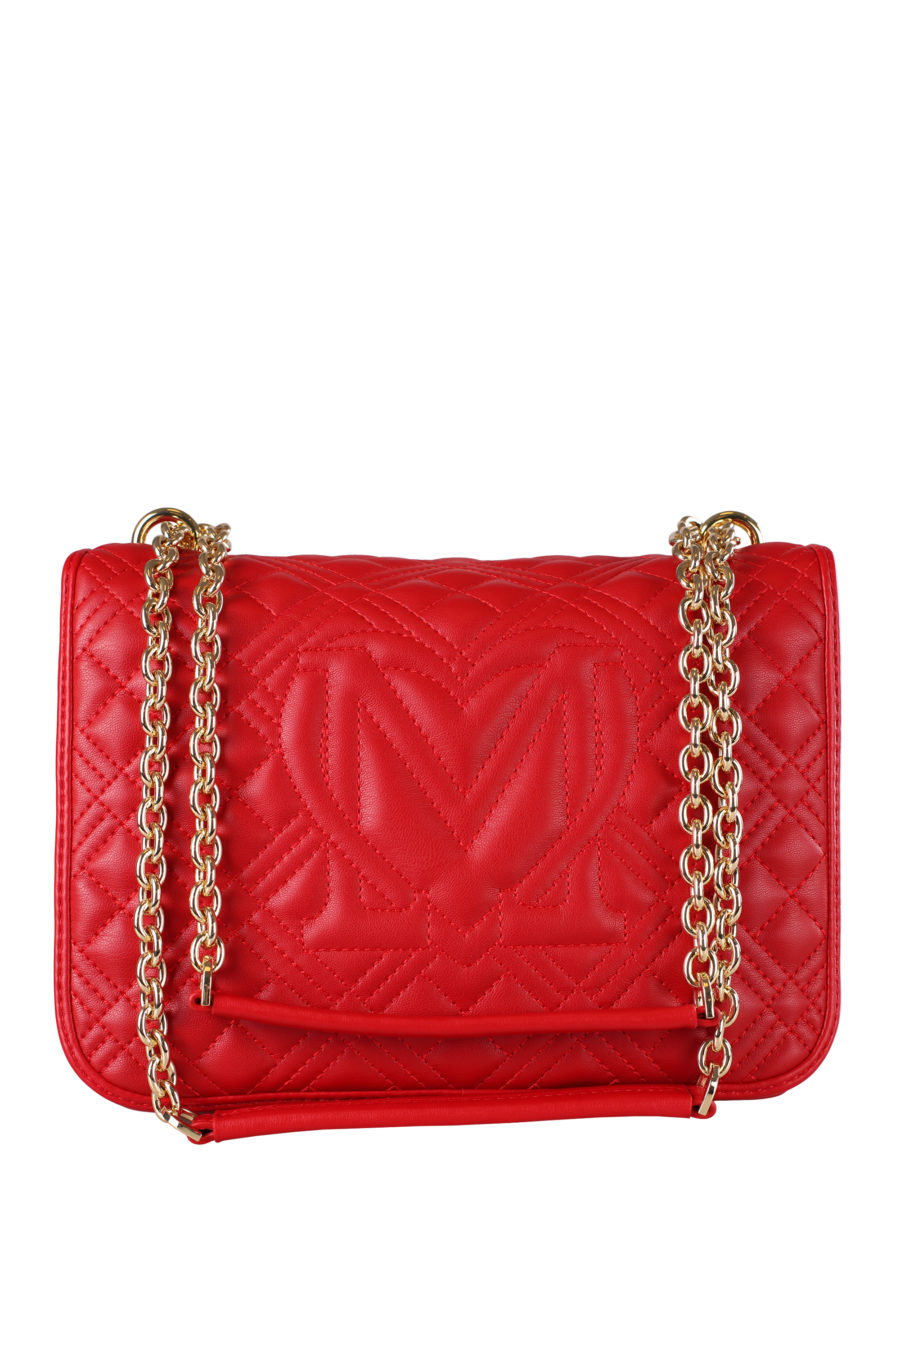 Red quilted bag with golden chain - IMG 4681